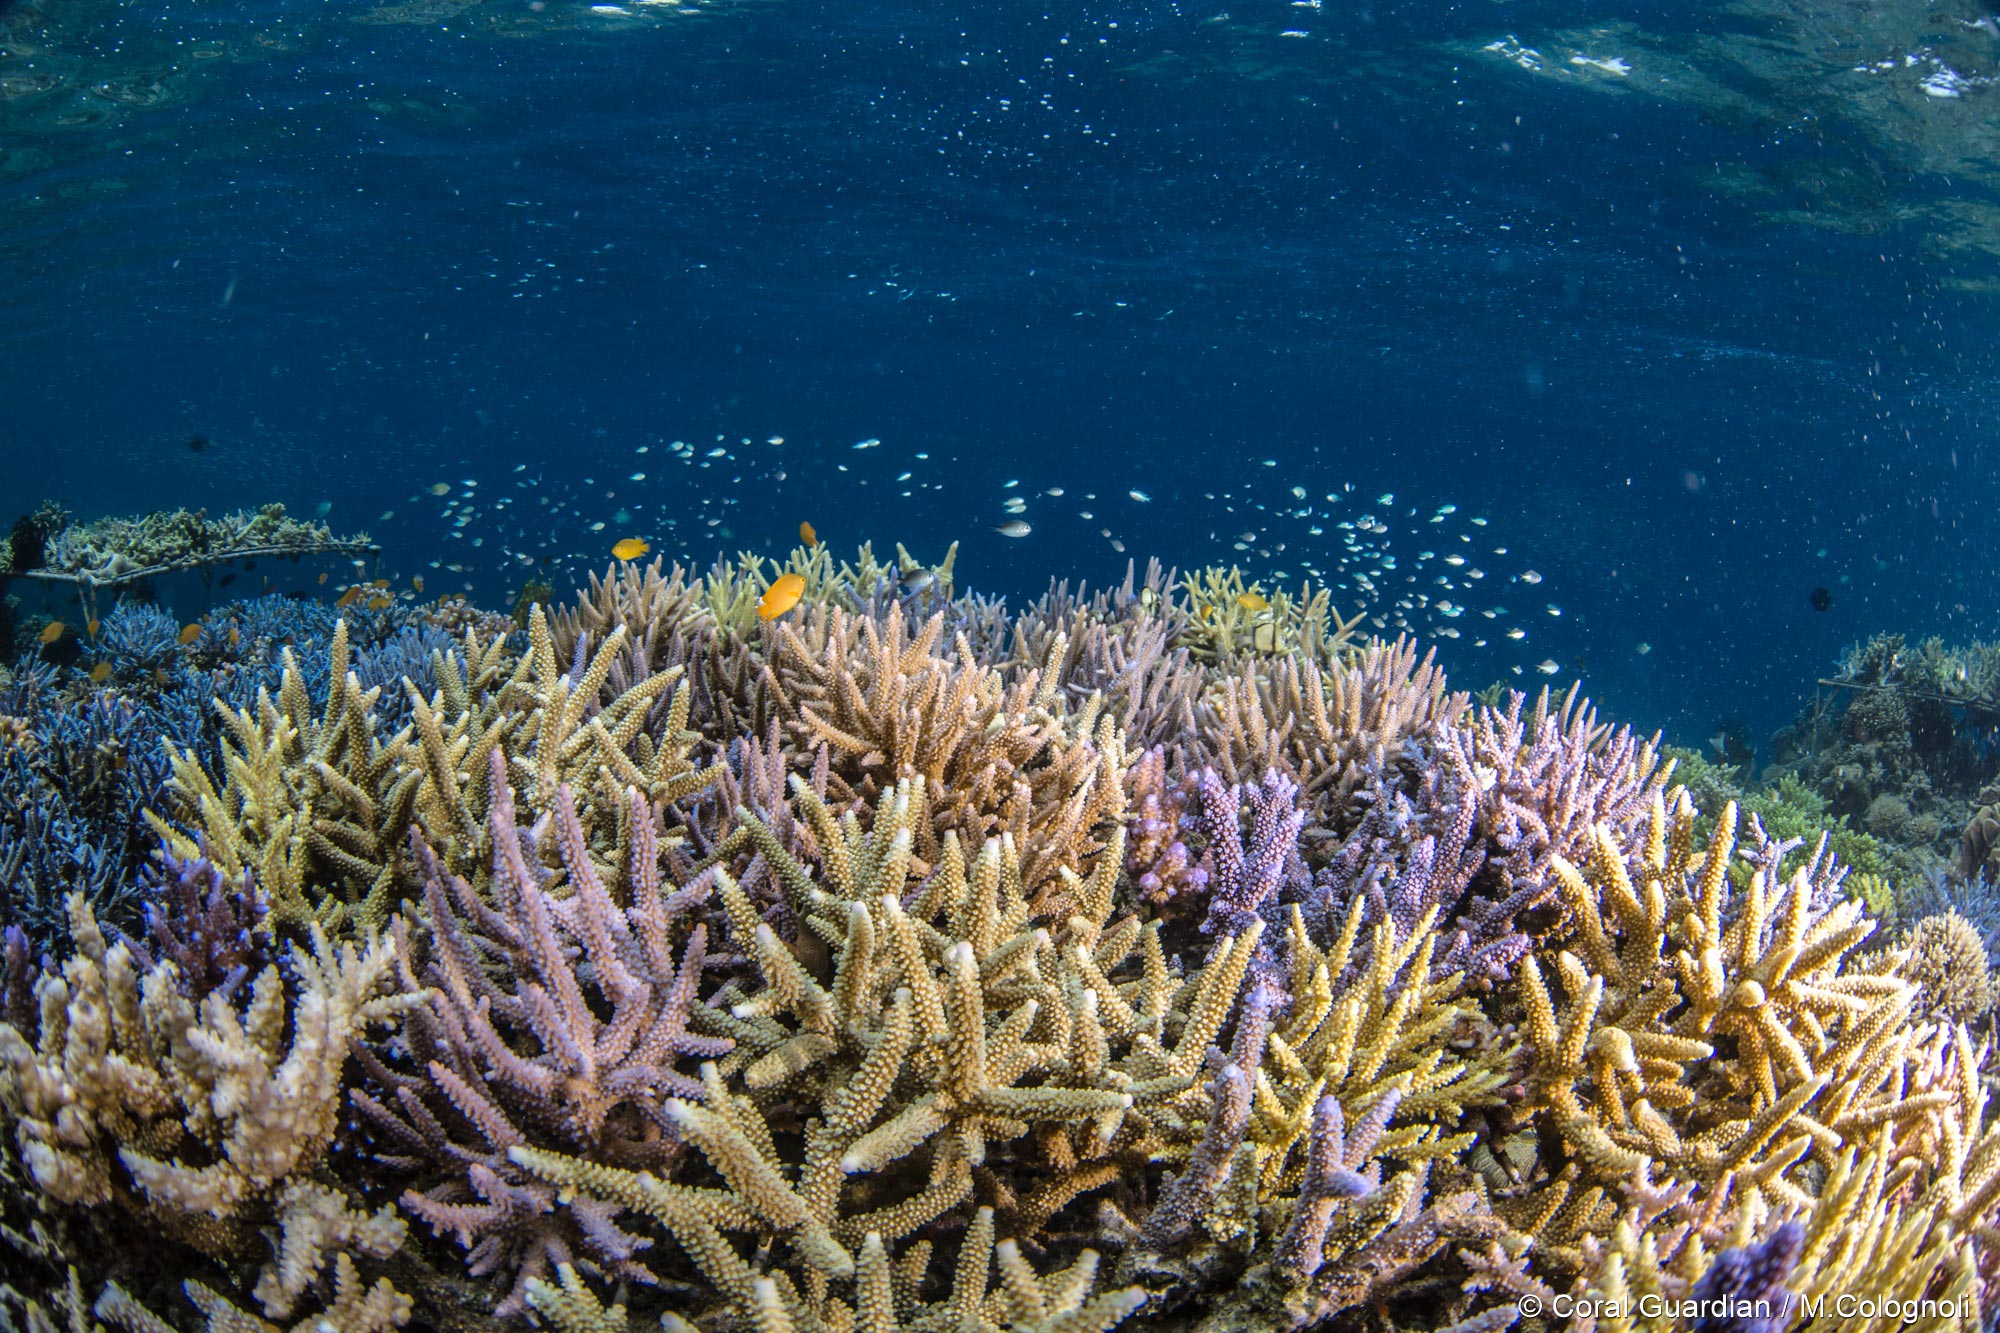 The importance of protecting coral reefs | Coral Guardian